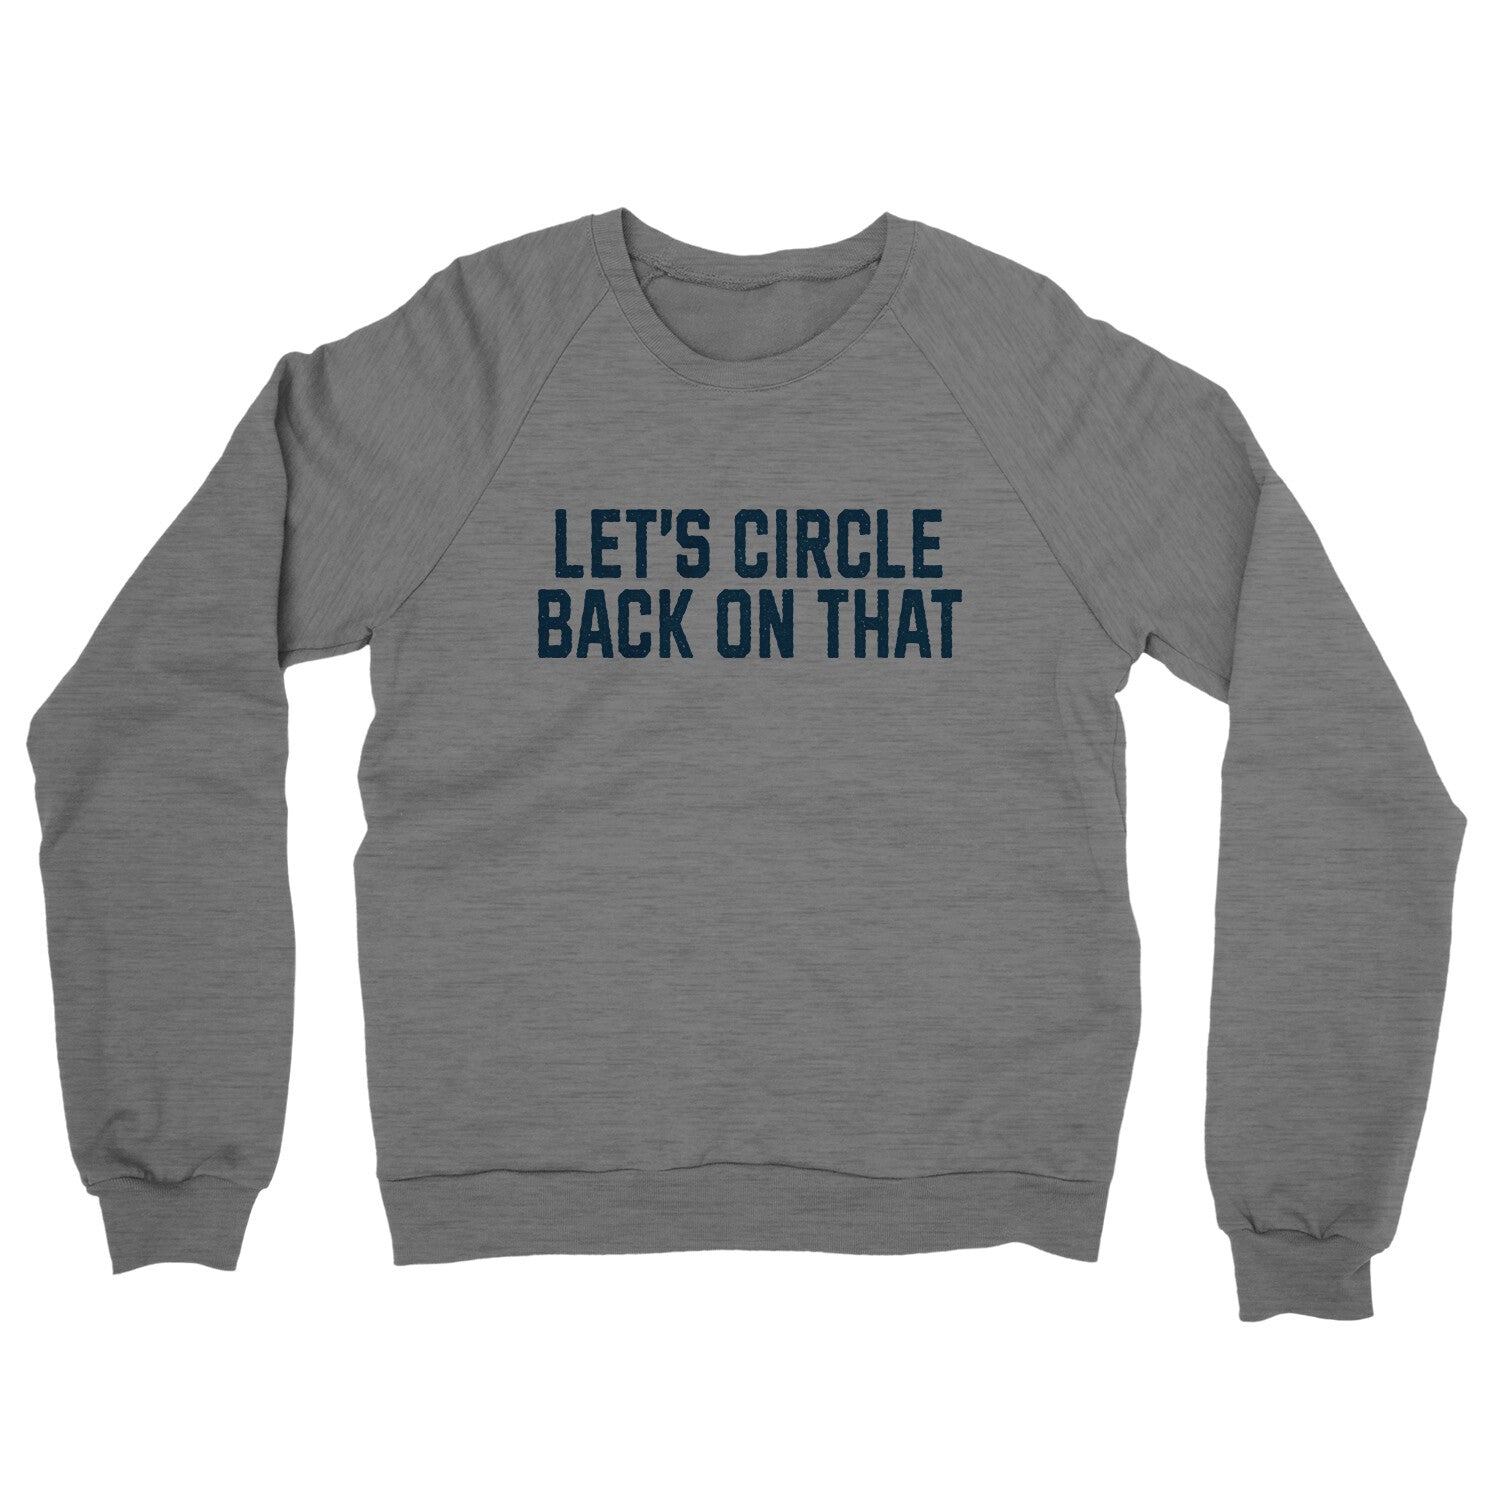 Let's Circle Back on That in Graphite Heather Color